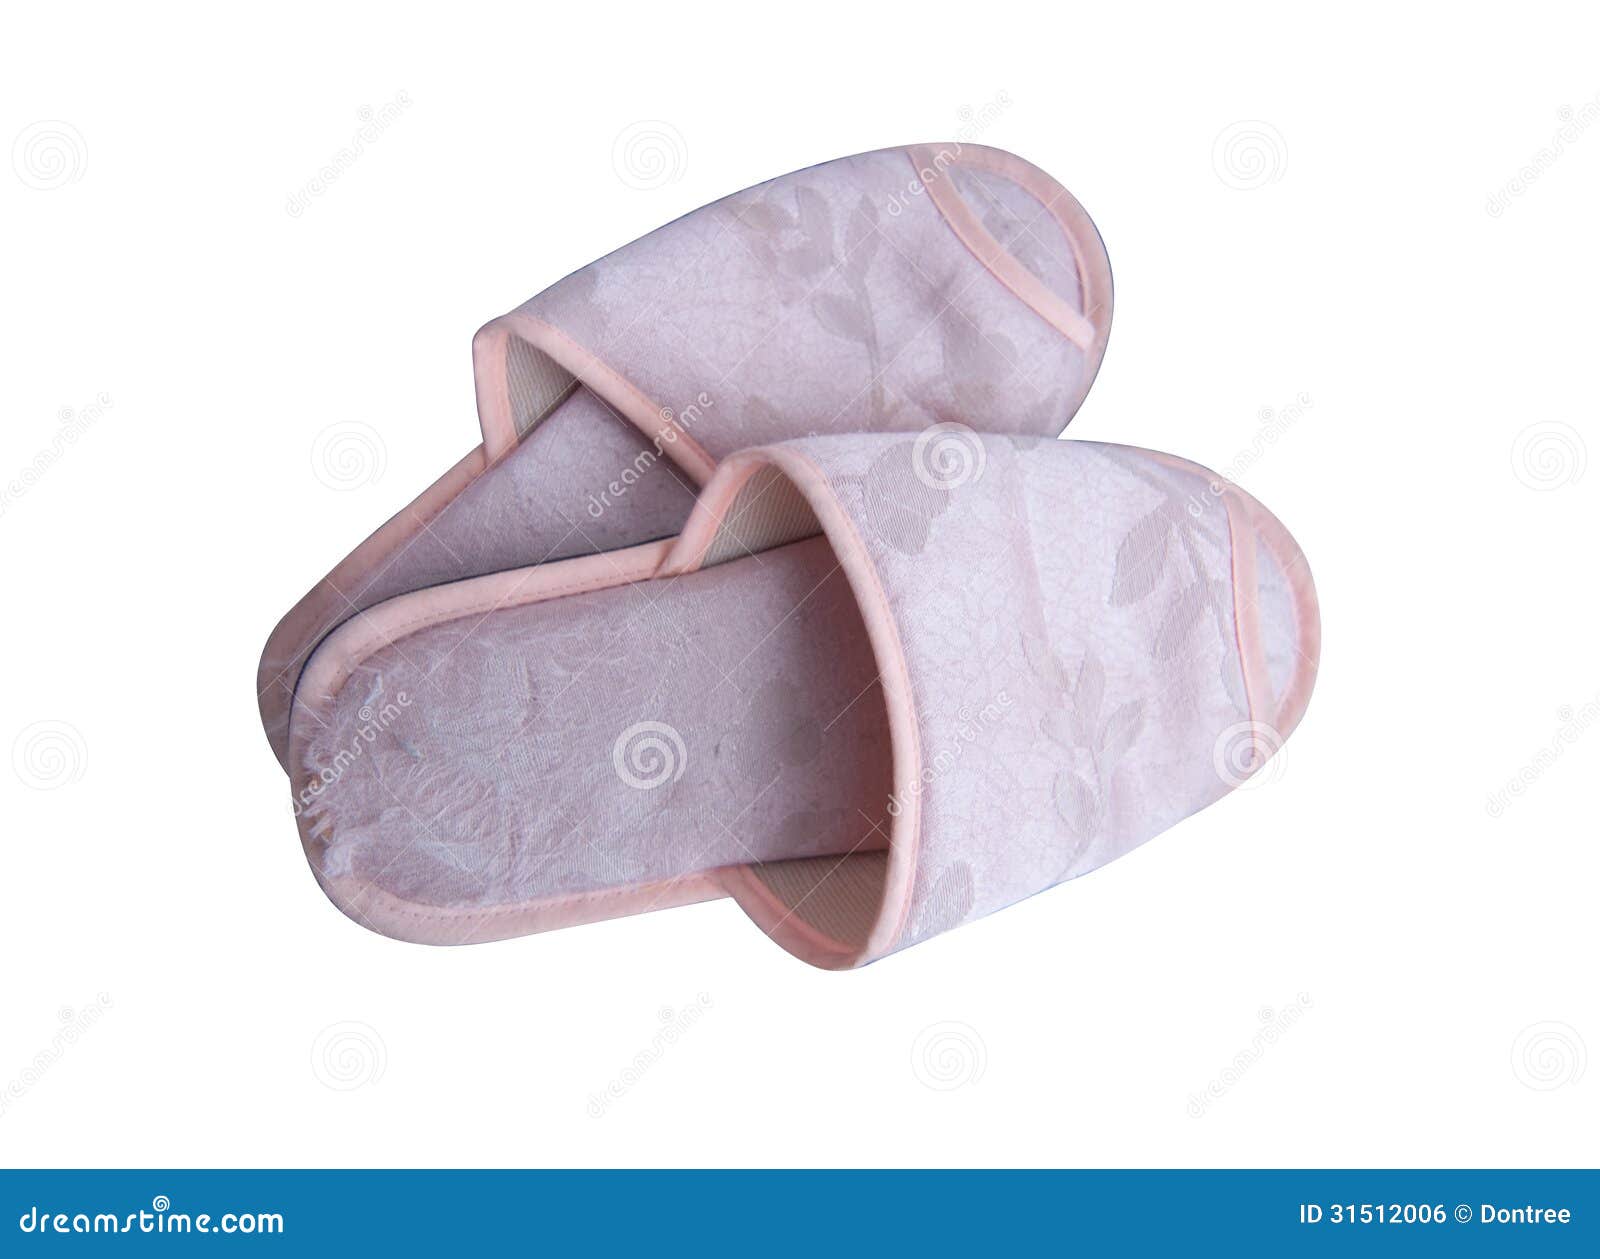 Slippers stock photo. Image of isolated, footwear, accessory - 31512006